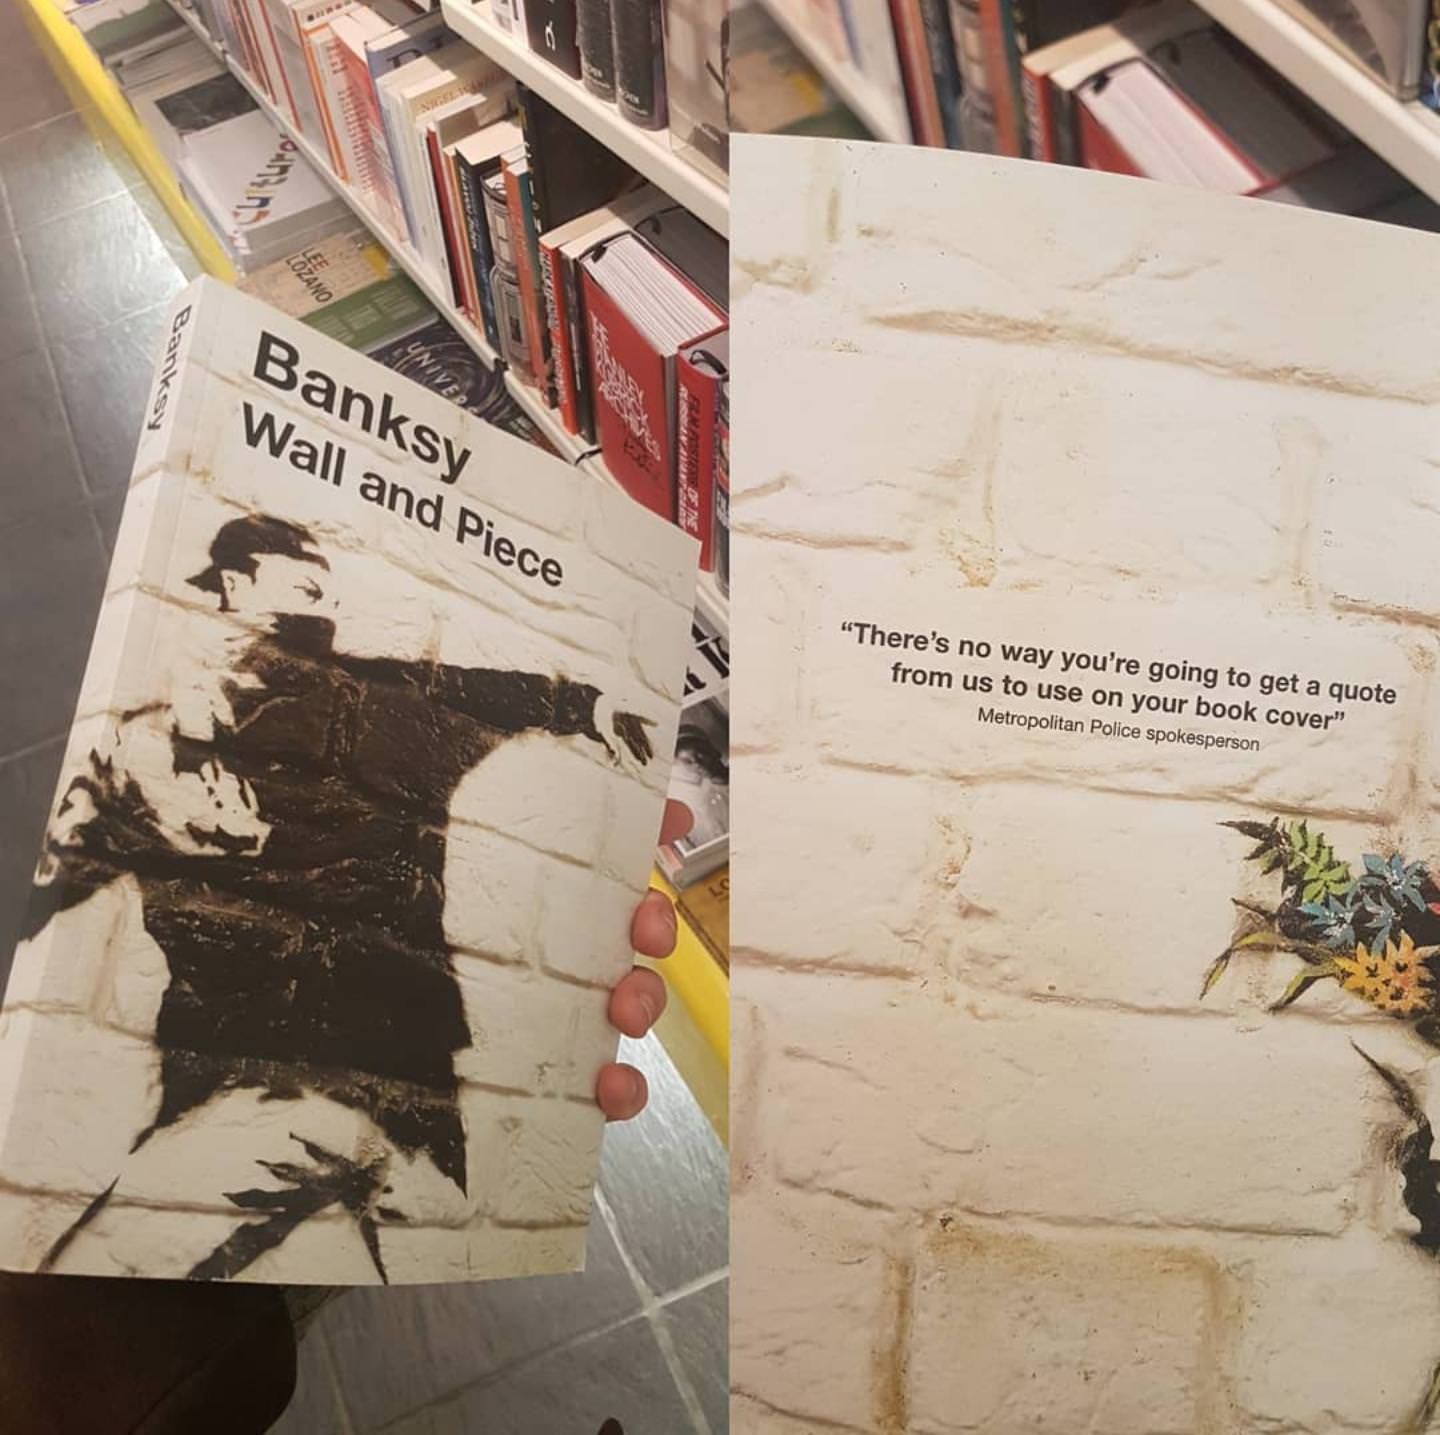 On the back cover of Banksy's book